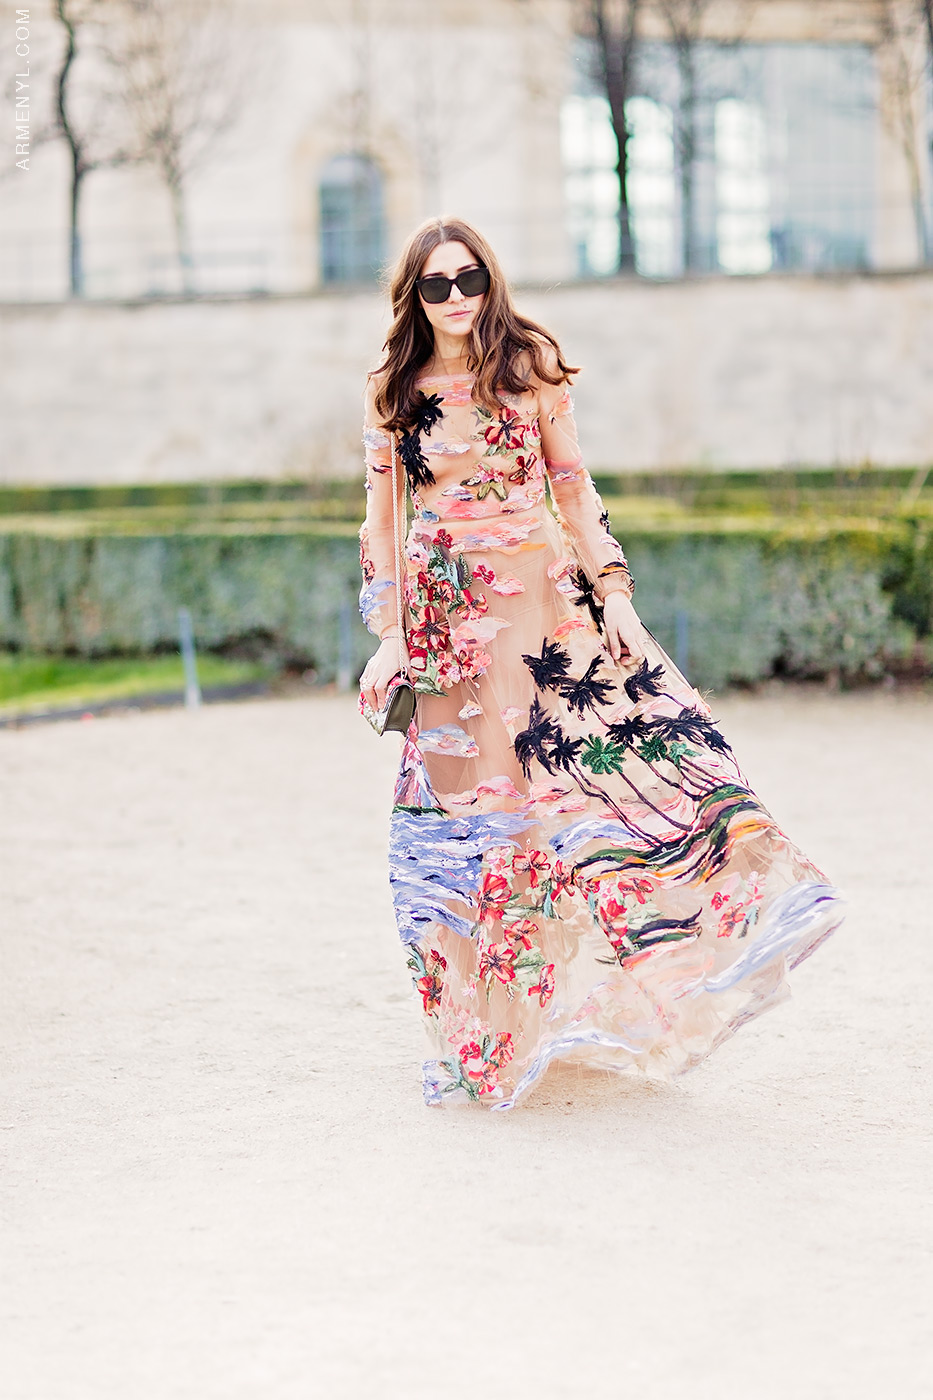 Street Style Eleonora Carisi in Maison Valentino Couture Dress at Paris Fashion Week Jardin des Tuileries by Armenyl.com